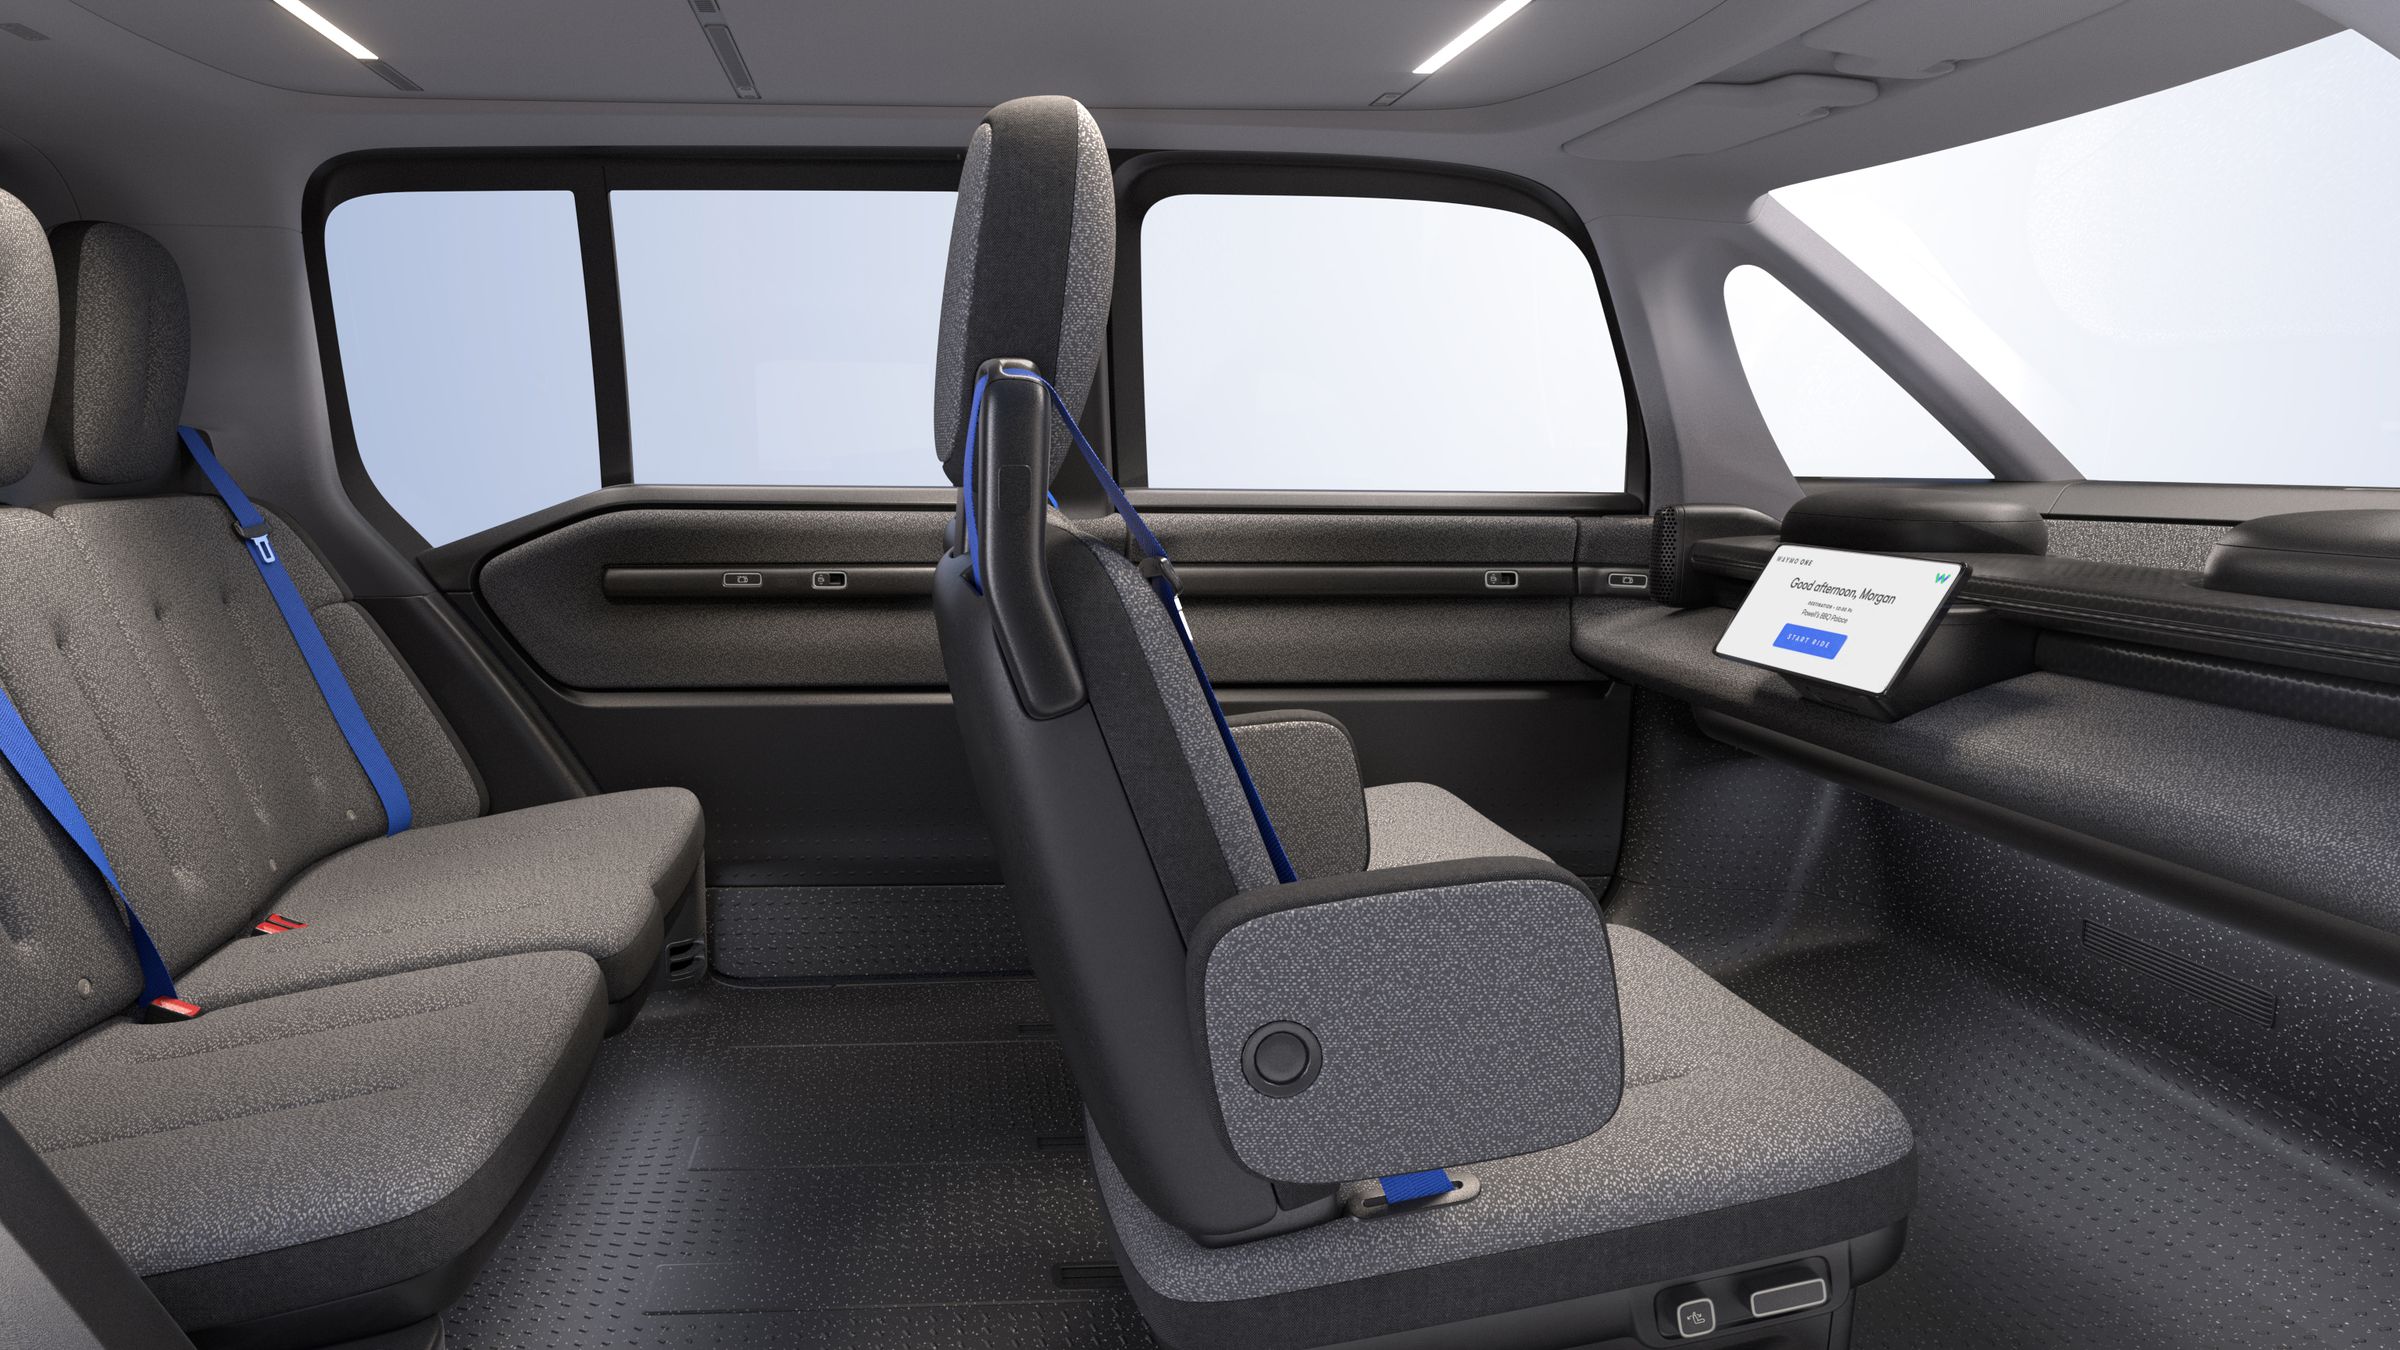 The car’s interiors will have no steering wheel or pedals — just a screen. 